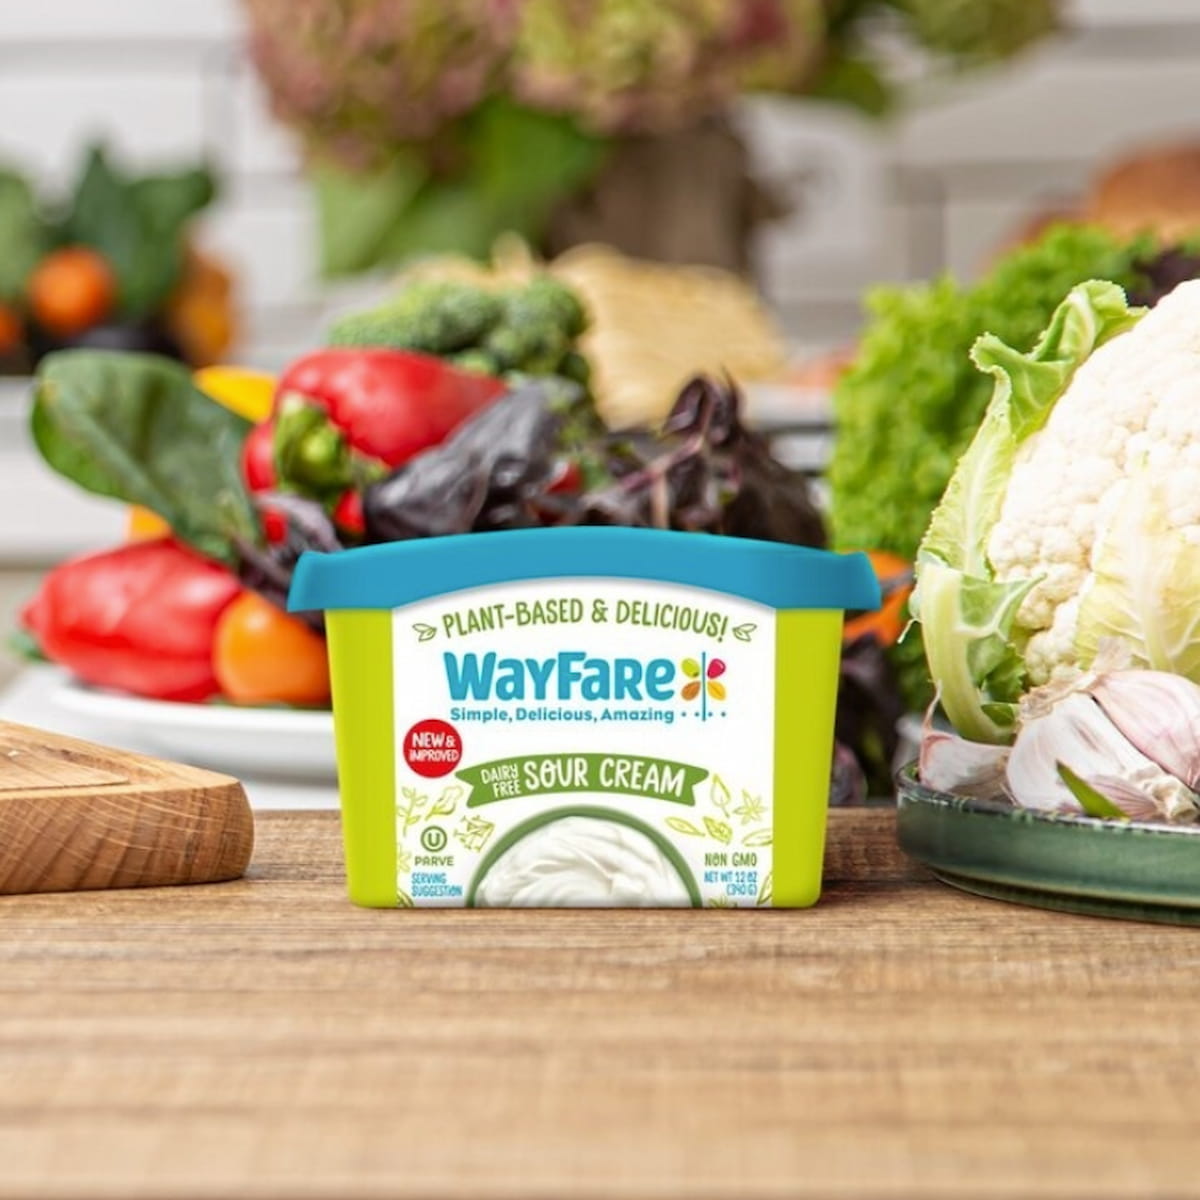 Container of Wayfare dairy-free sour cream with fresh veggies in the background.